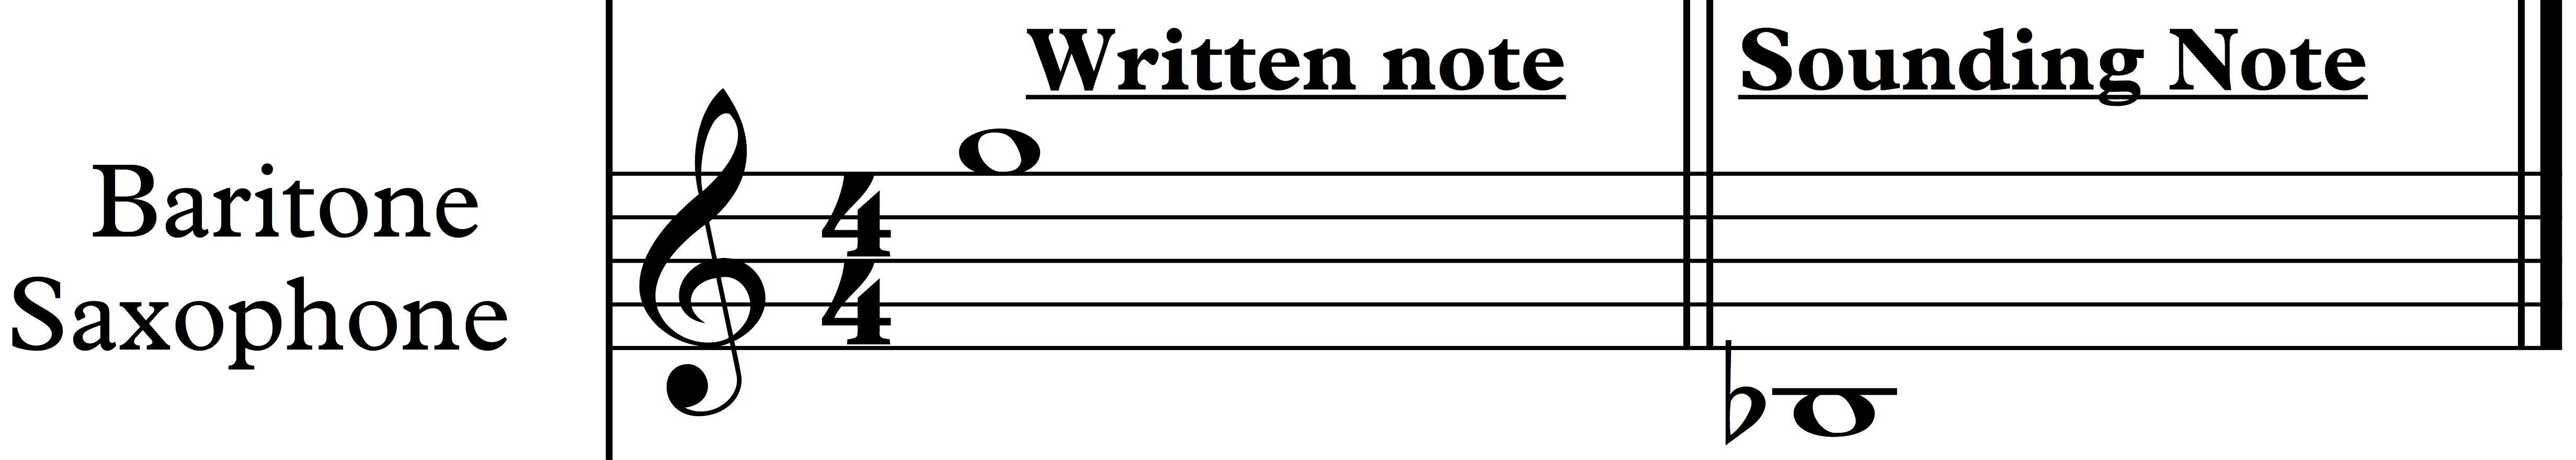 Concert Pitch Transposition Chart and Flashcards